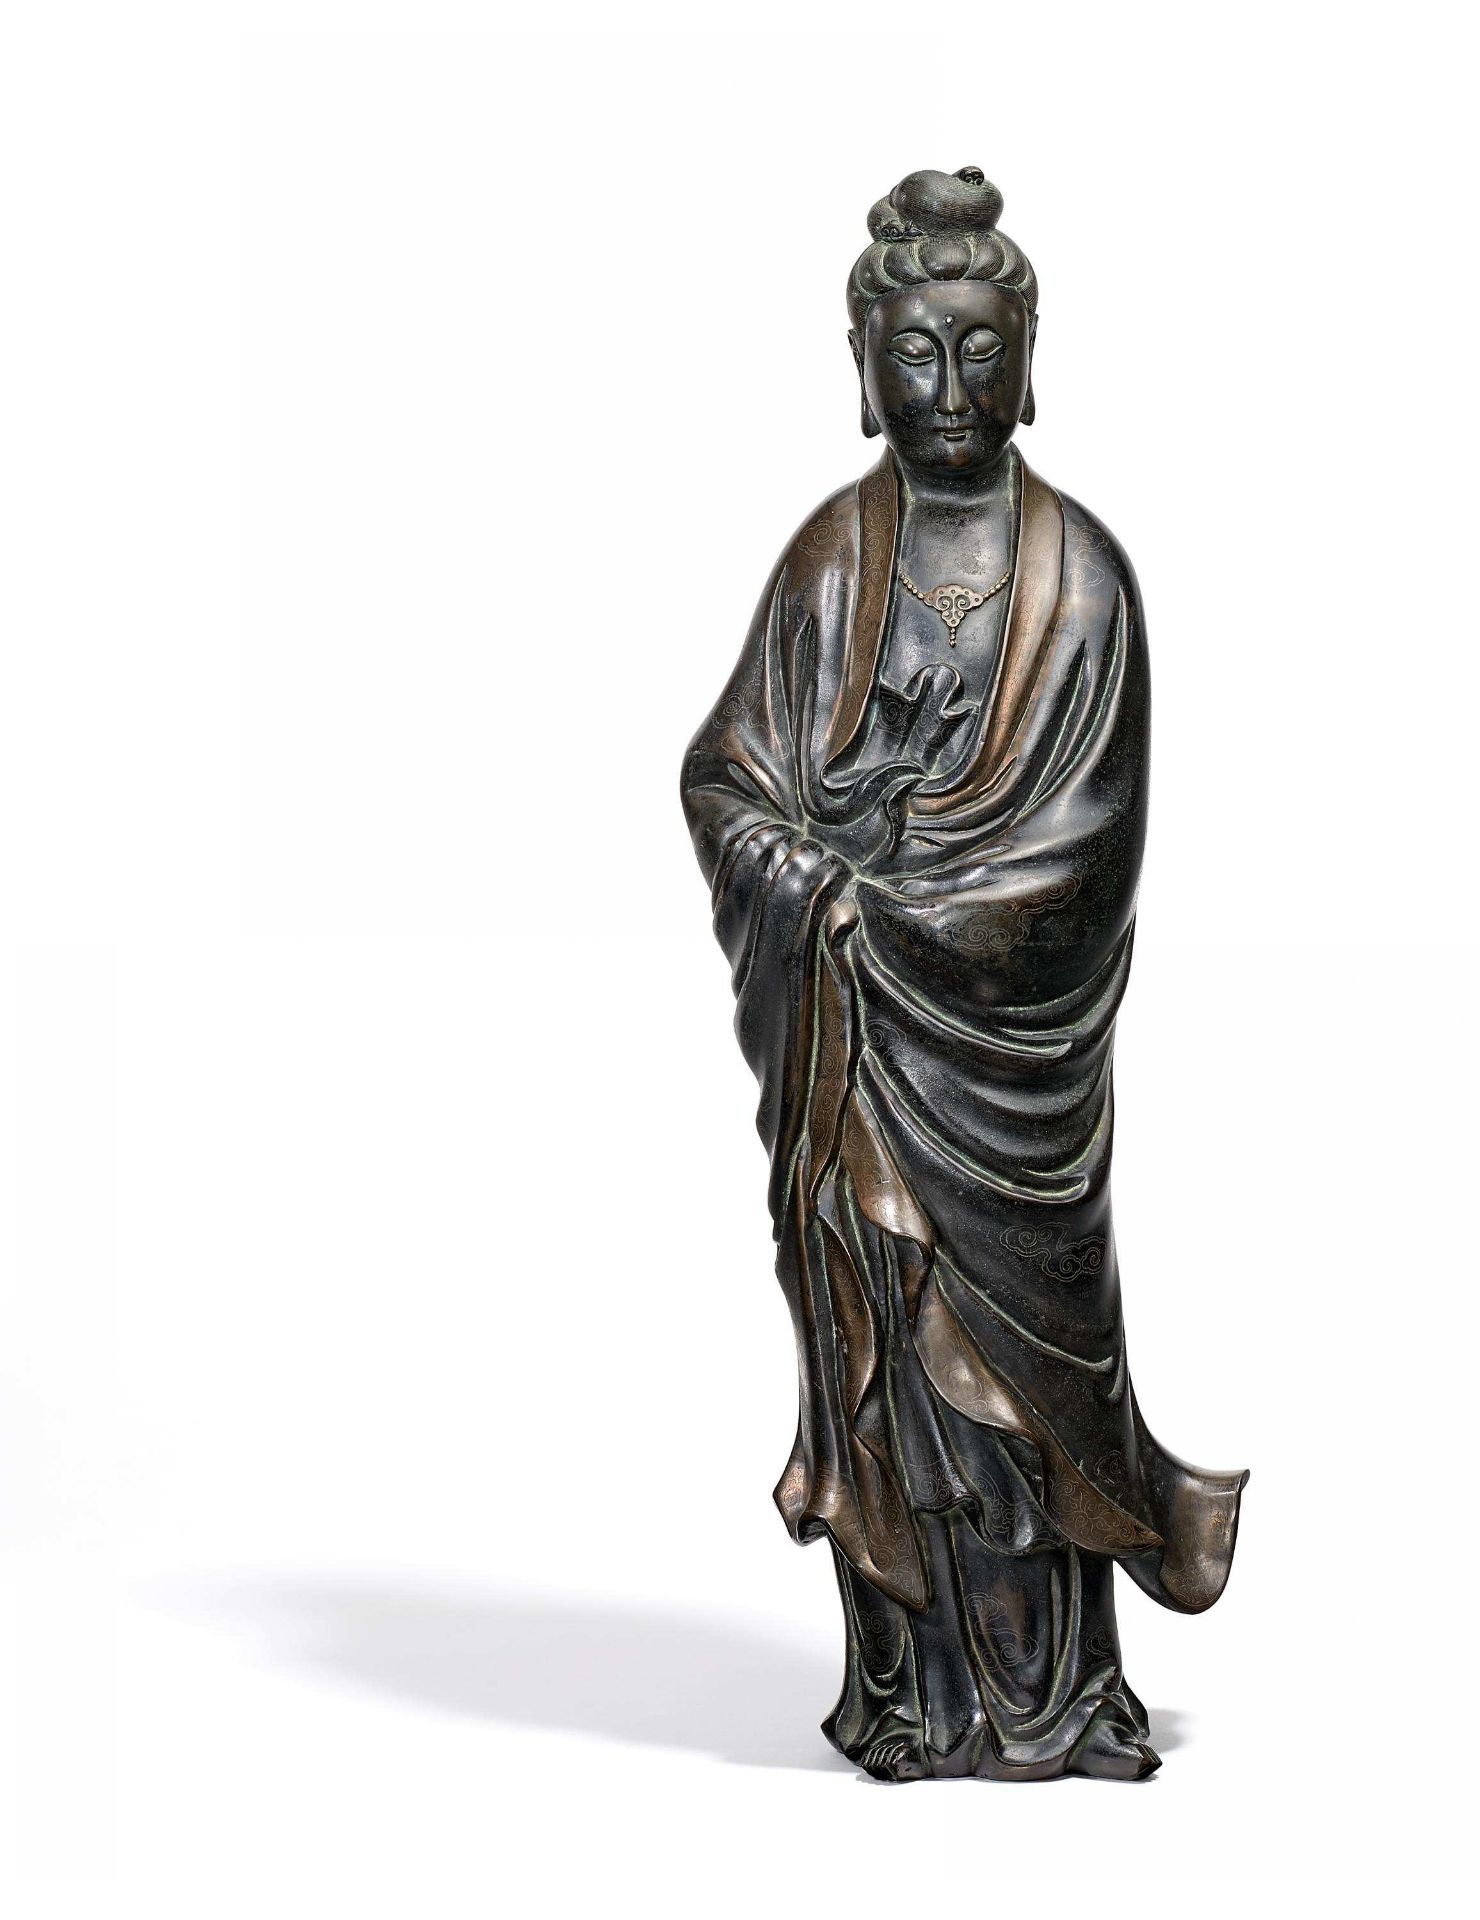 TALL GUANYIN. China. Qing dynasty or later Bronze with silver inlays and black lacquer. Guanyin as